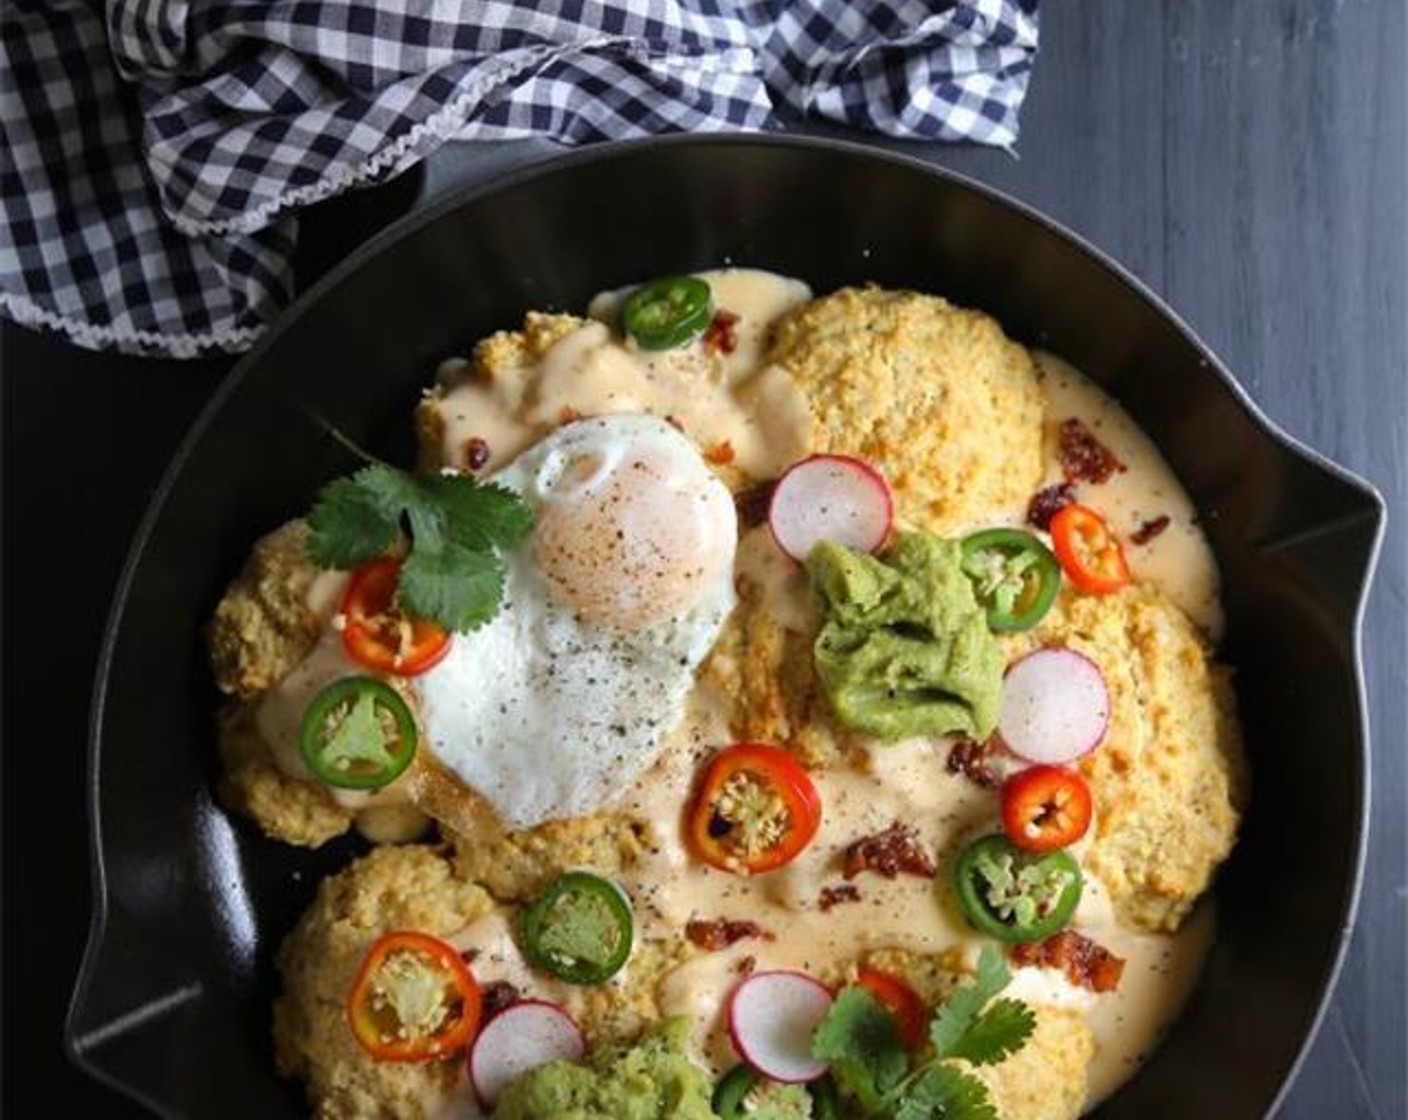 Skillet Biscuit with Bacon and Pimento Cheese